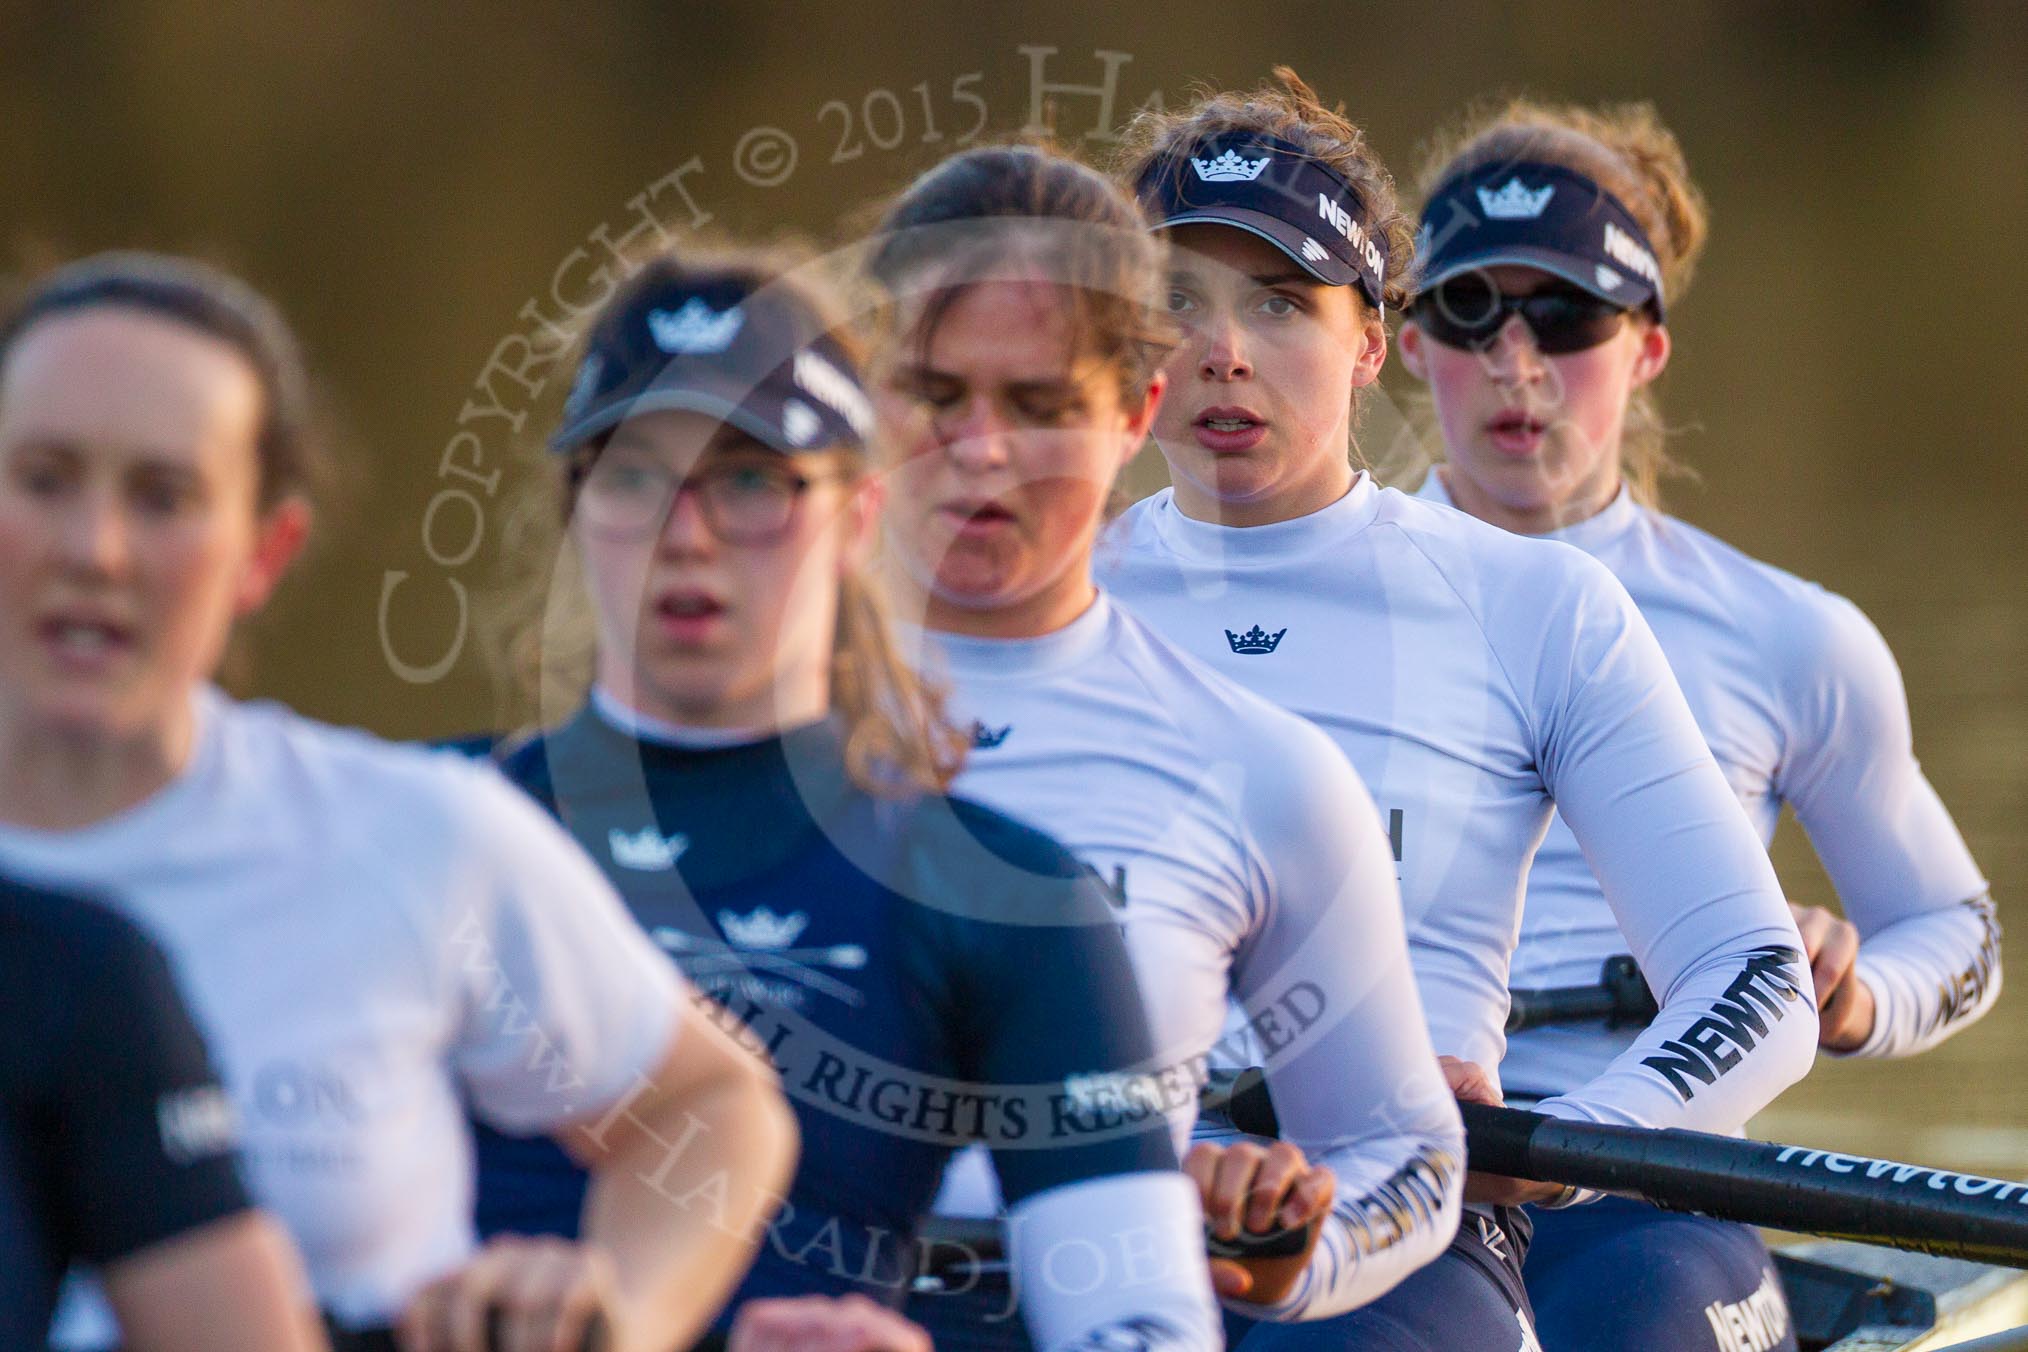 The Boat Race season 2015: OUWBC training Wallingford.

Wallingford,

United Kingdom,
on 04 March 2015 at 17:30, image #353